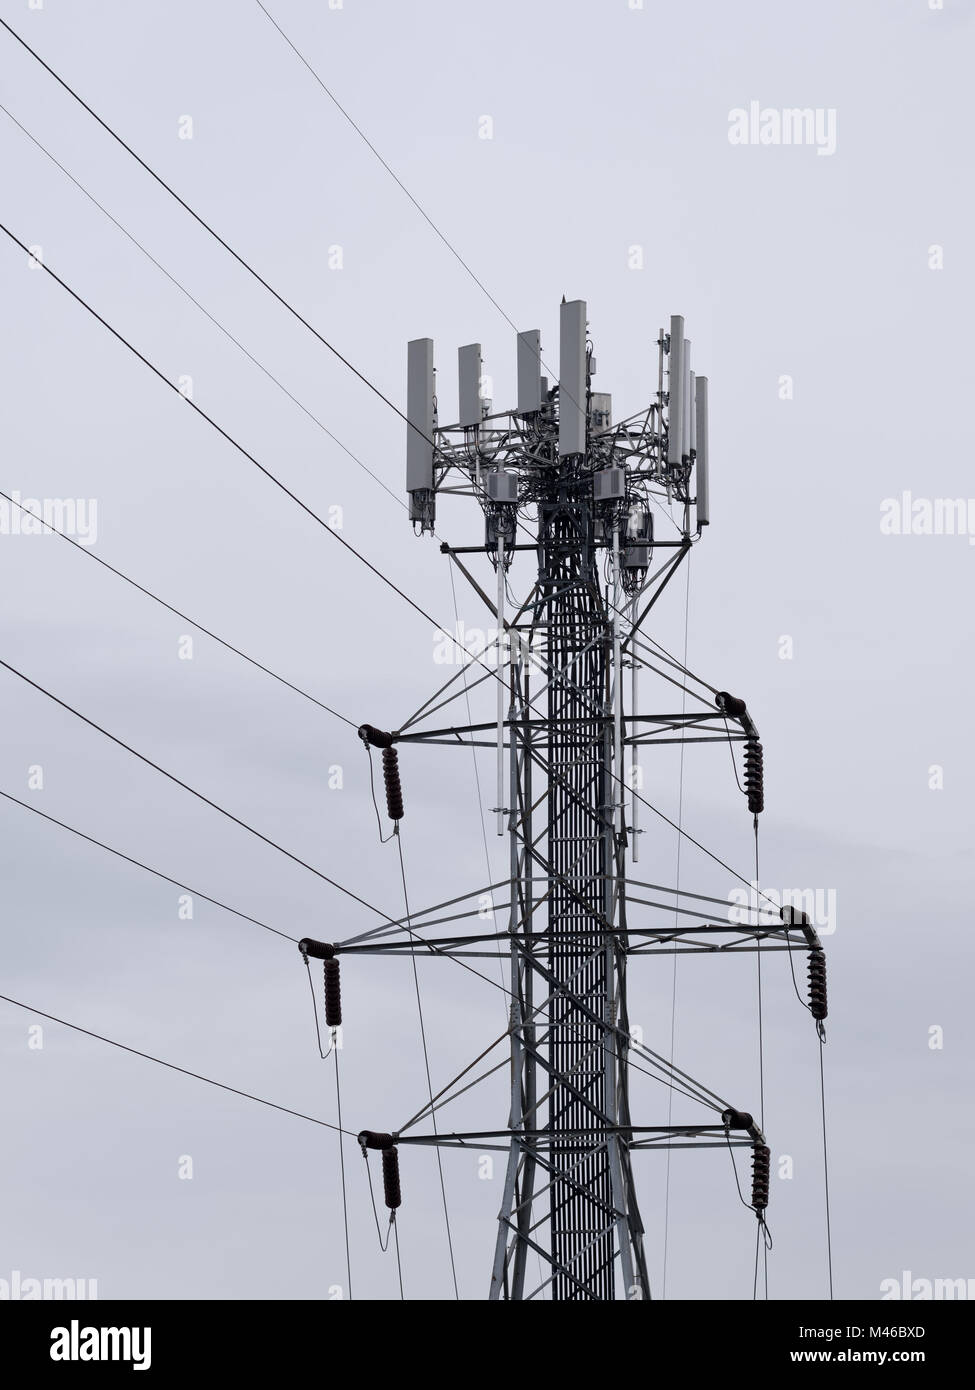 communication antennas on electrical power transmission line towers Stock  Photo - Alamy